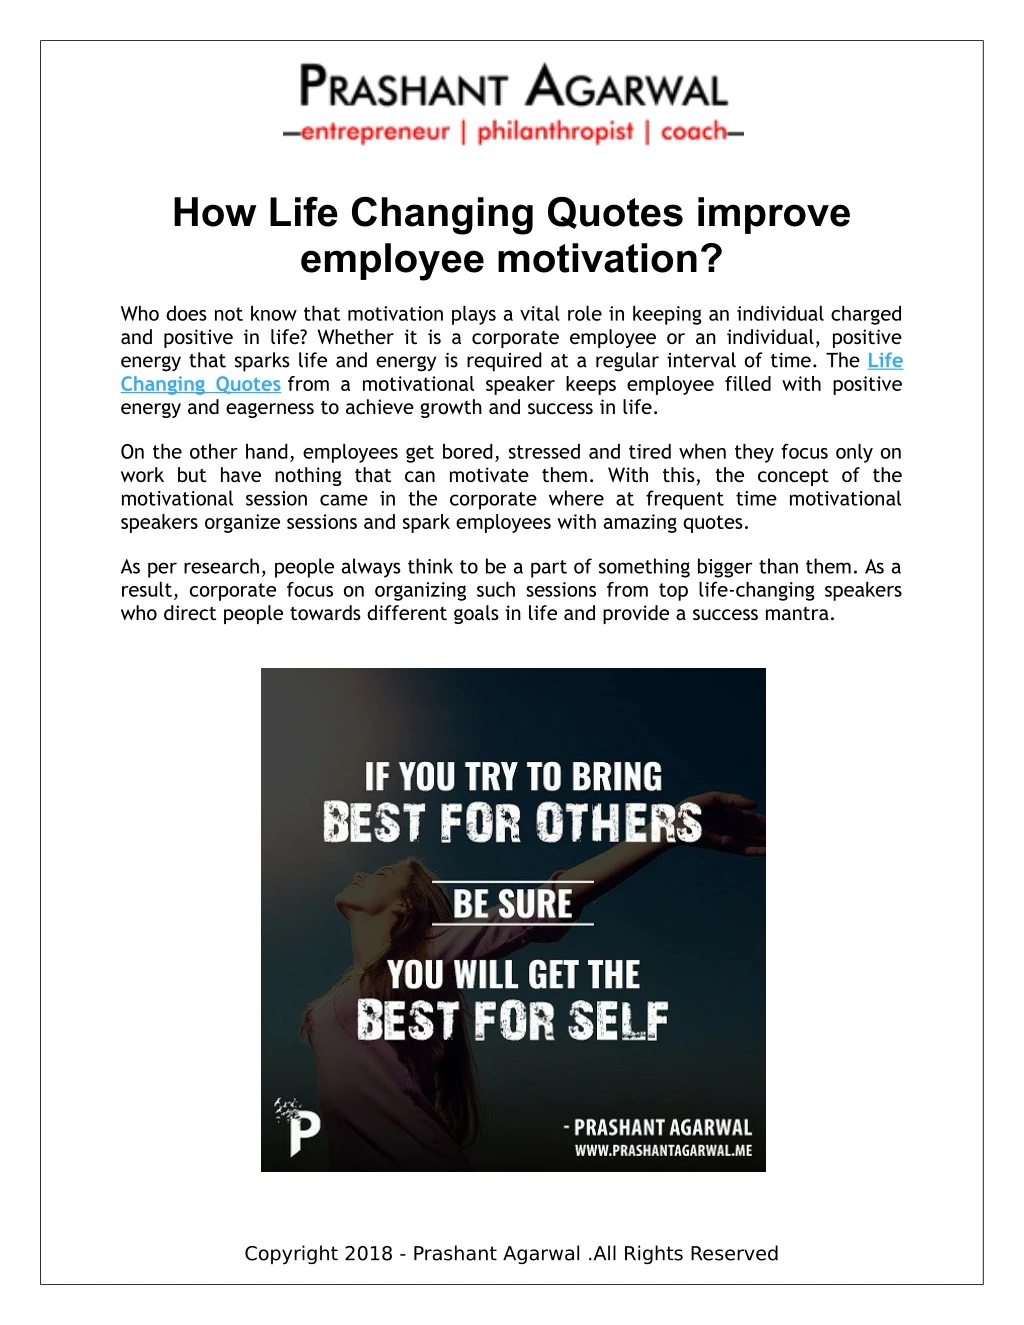 how life changing quotes improve employee